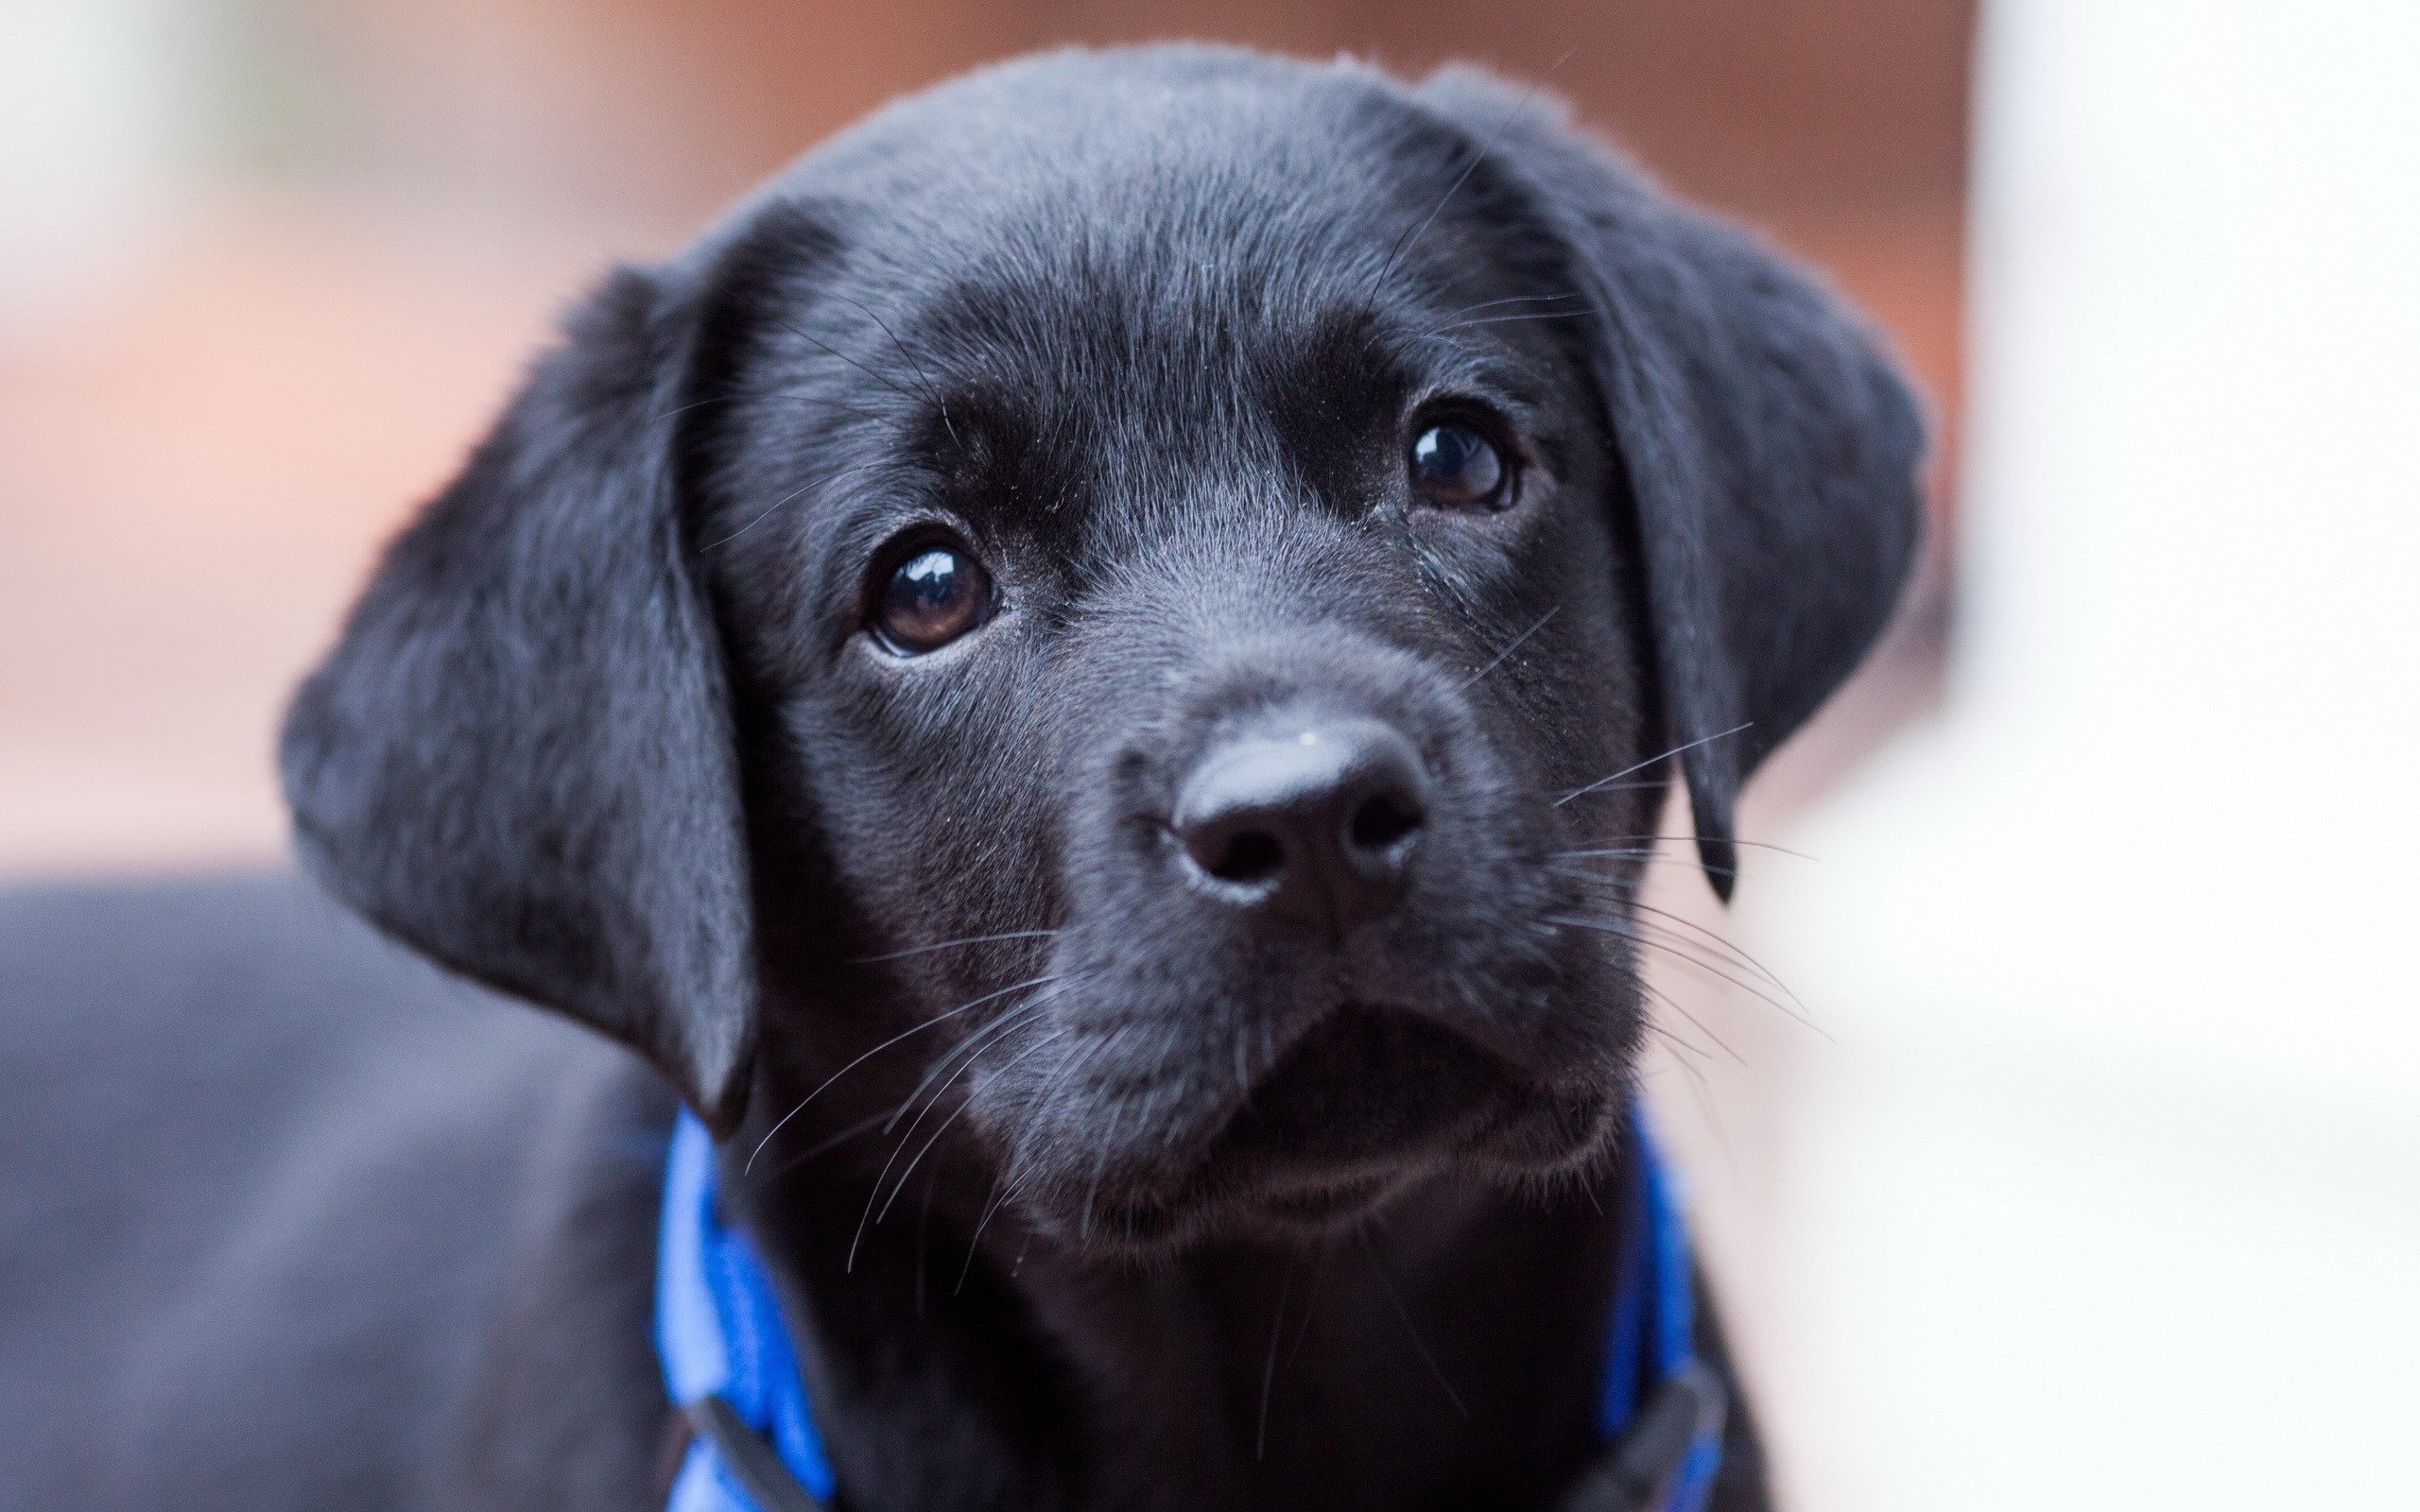 http://7-themes.com/data_images/out/59/6974349-cute-black-puppy.jpg